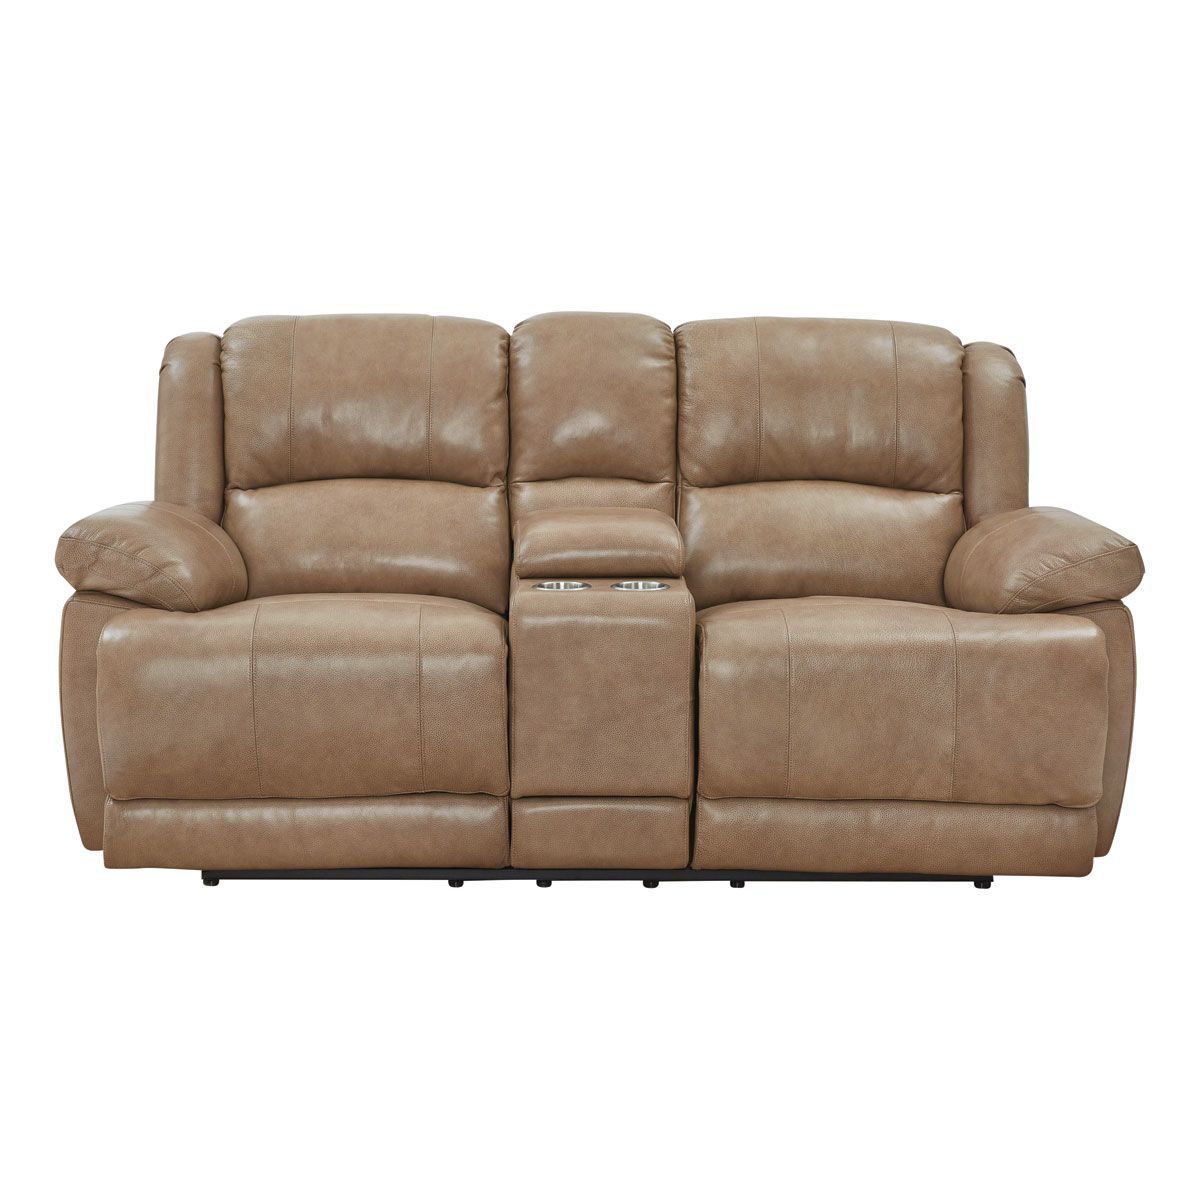 Picture of VICTOR LEATHER MANUAL RECLINING CONSOLE LOVESEAT